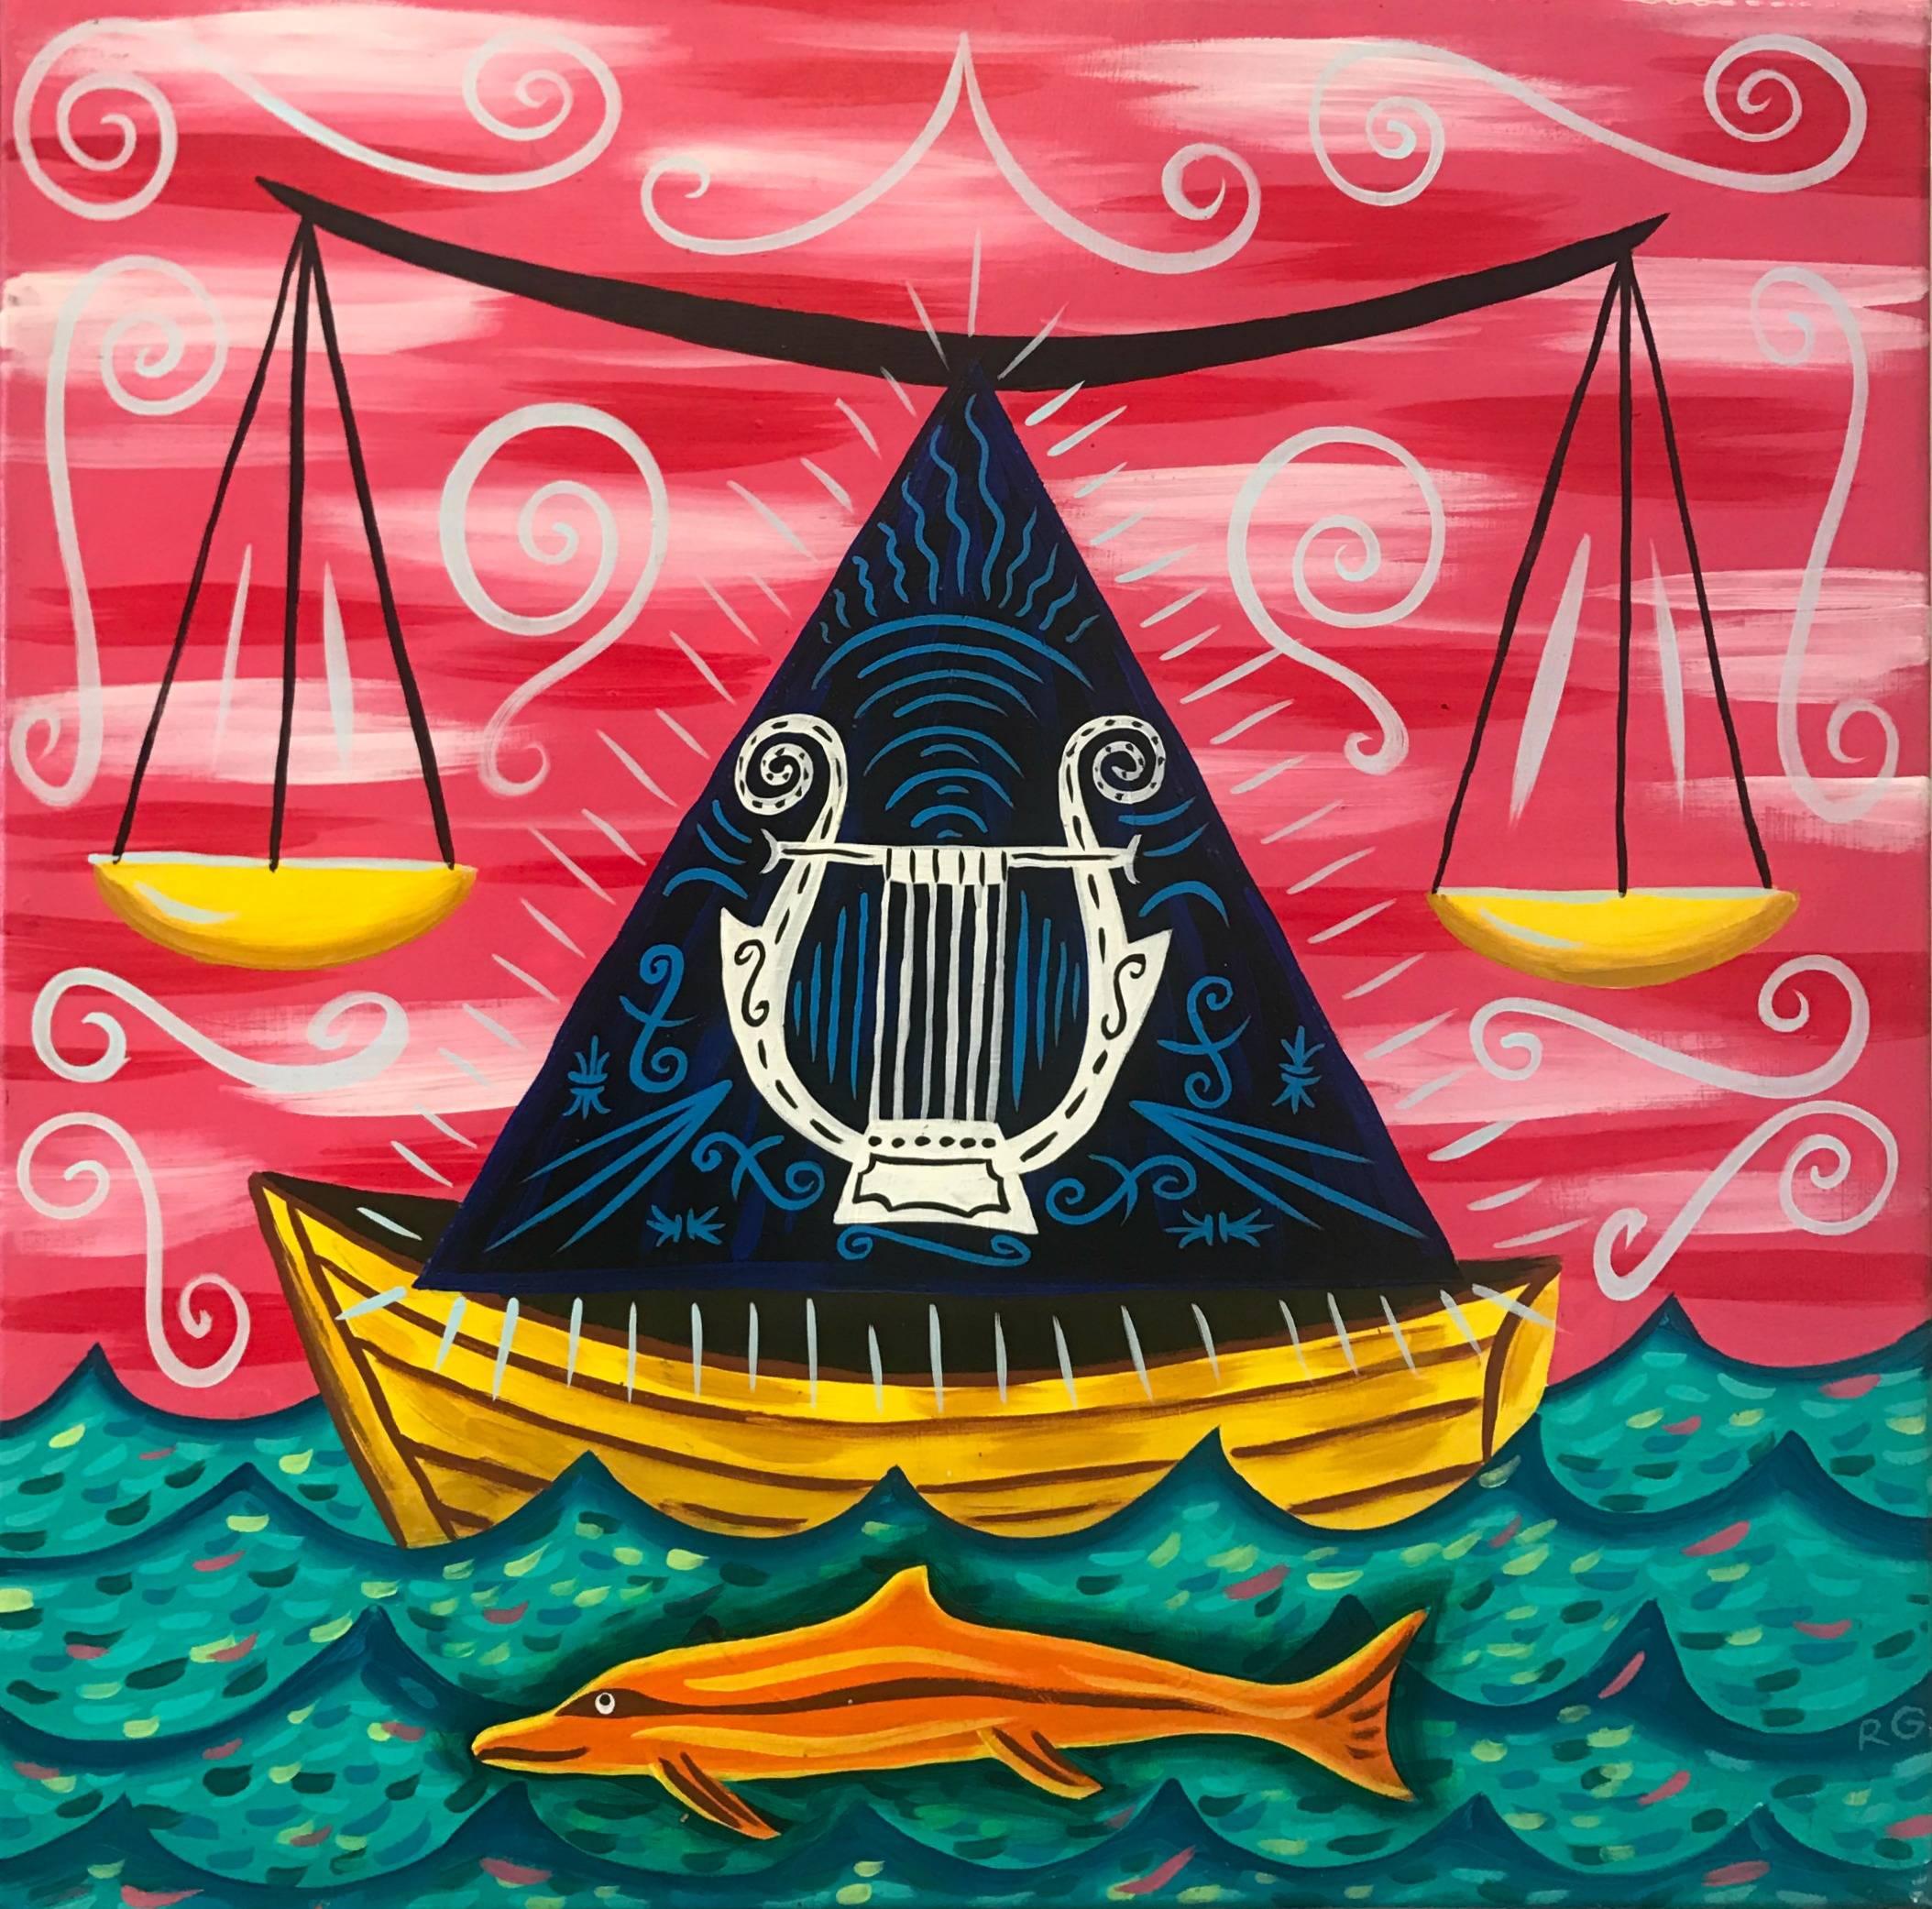 Acrylic on canvas fine art wall painting by American artist Rodney Alan Greenblat. A small wooden boat with a white harp in the center of a dark triangle balances two scales from its tip. The boat sails on green water under a red sky as a orange